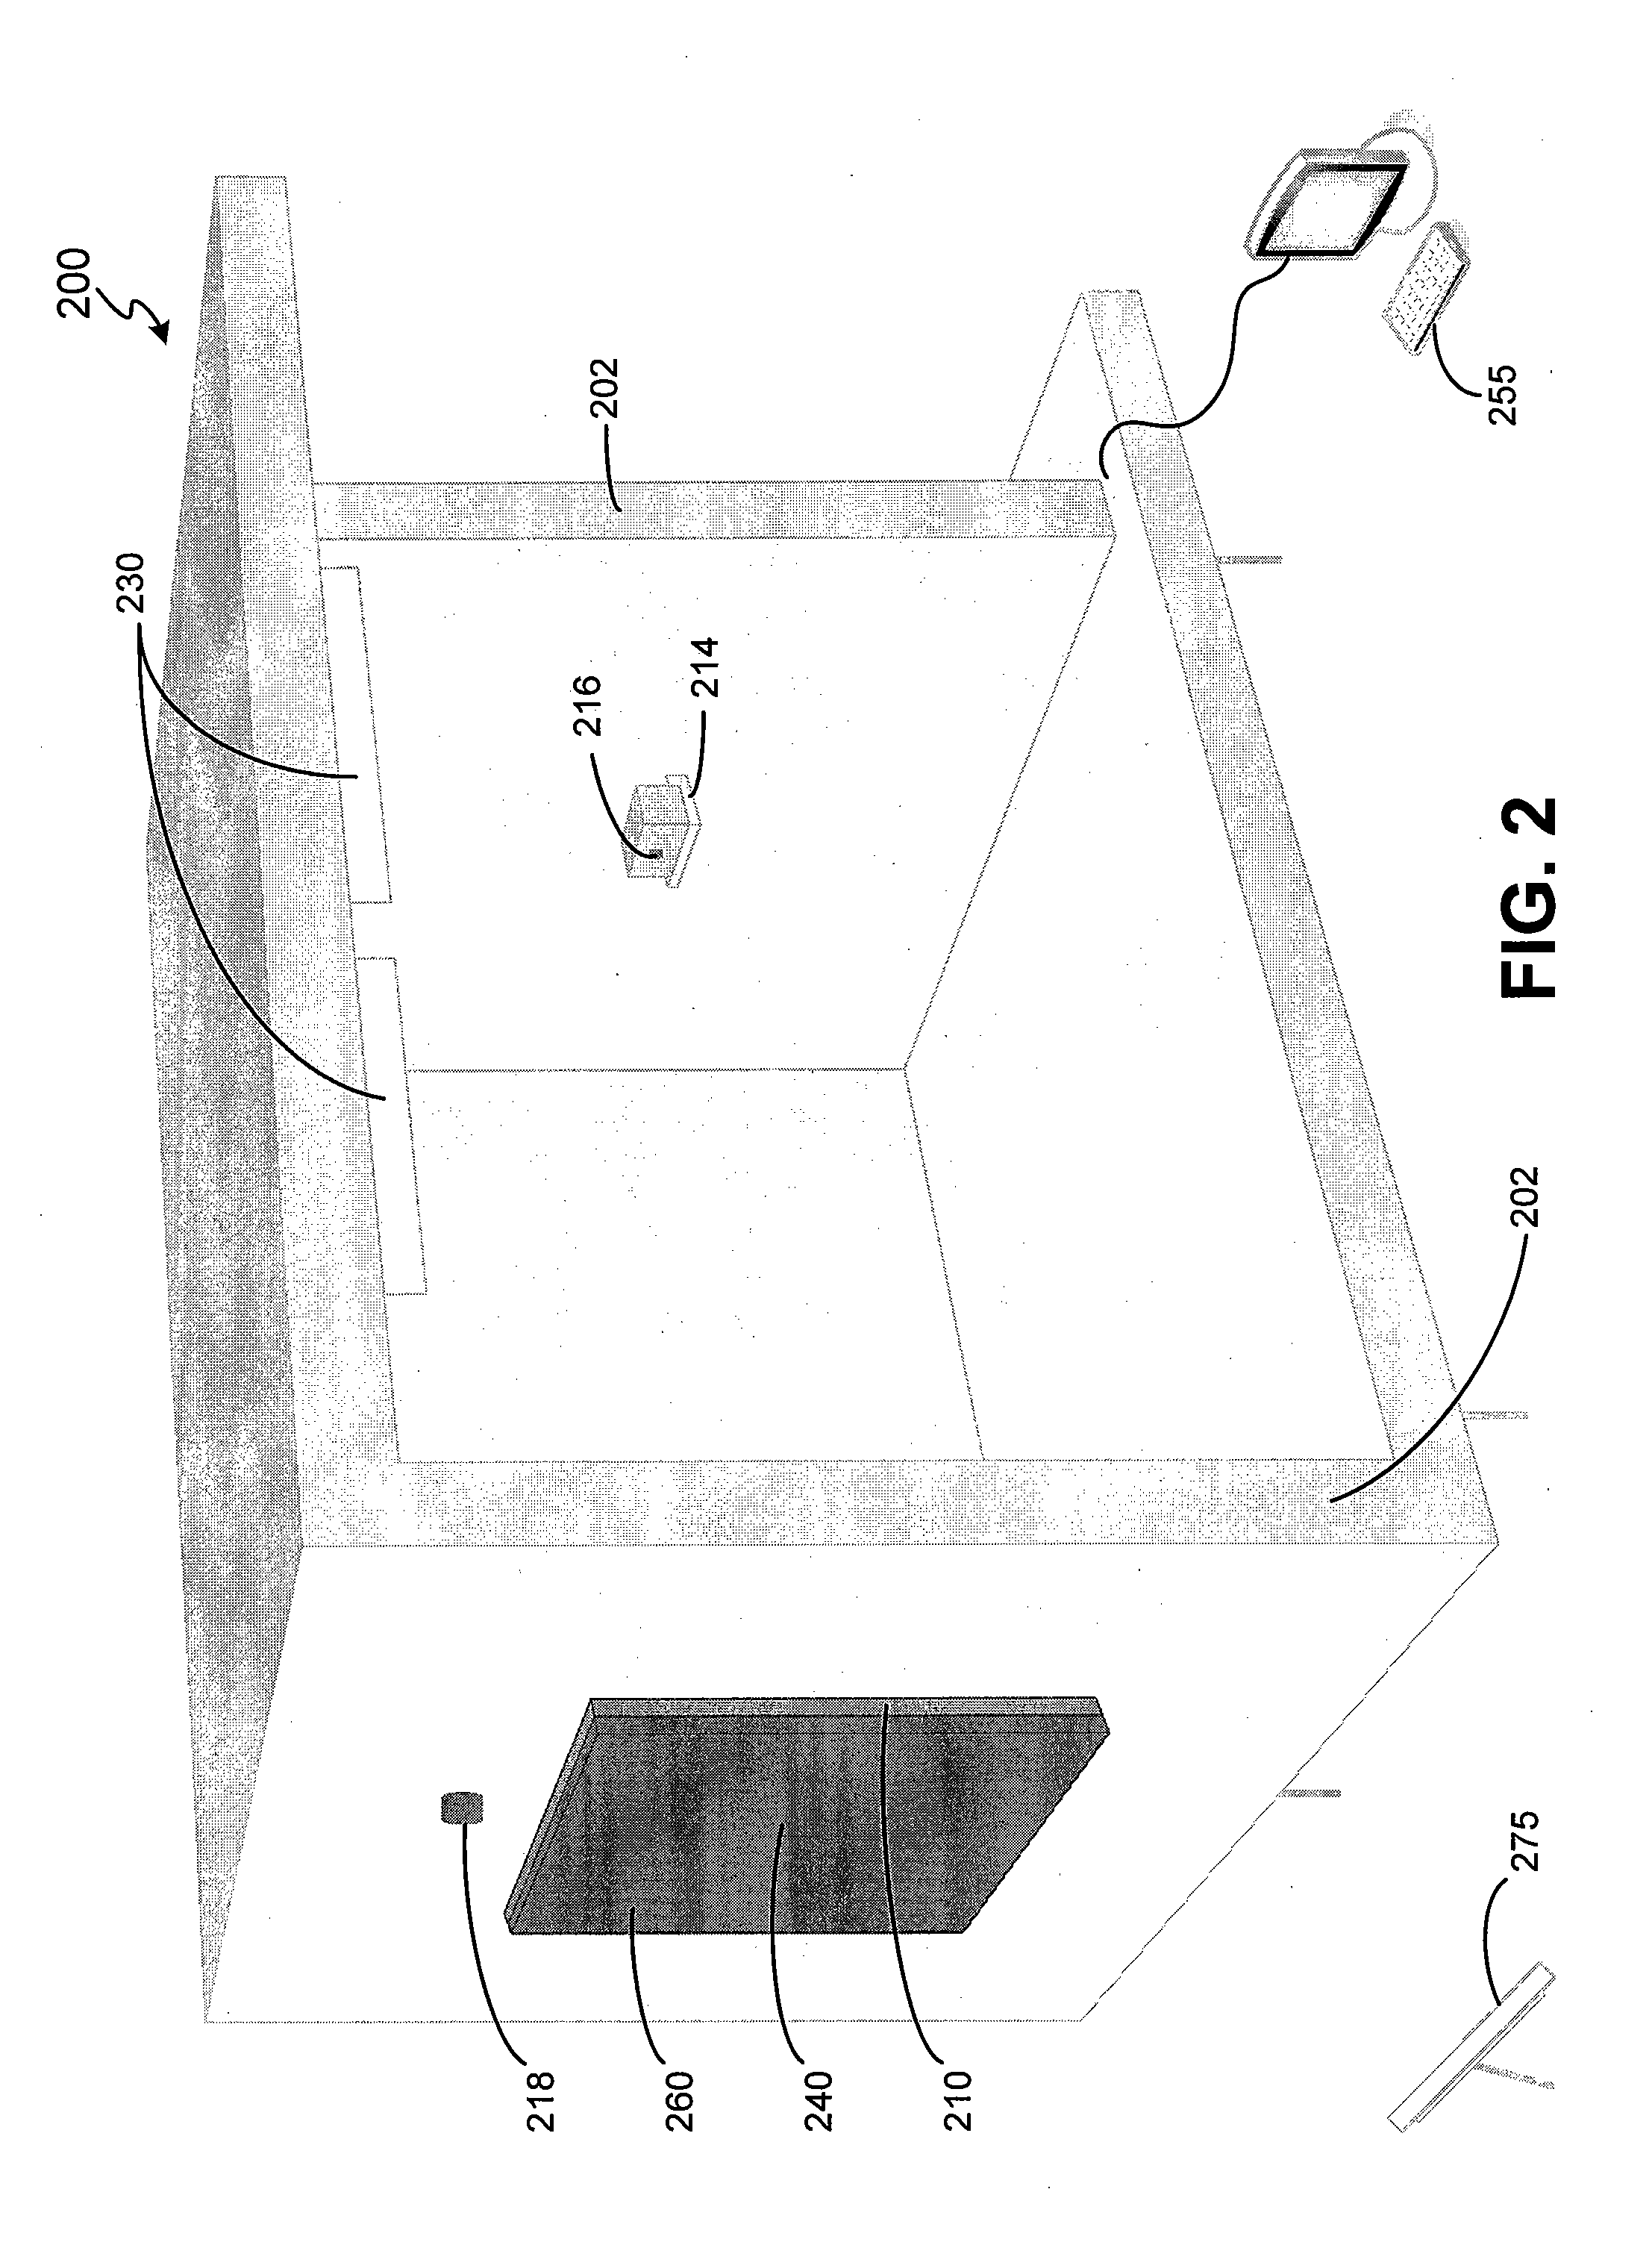 System and Method For Shade Selection Using a Fabric Brightness Factor